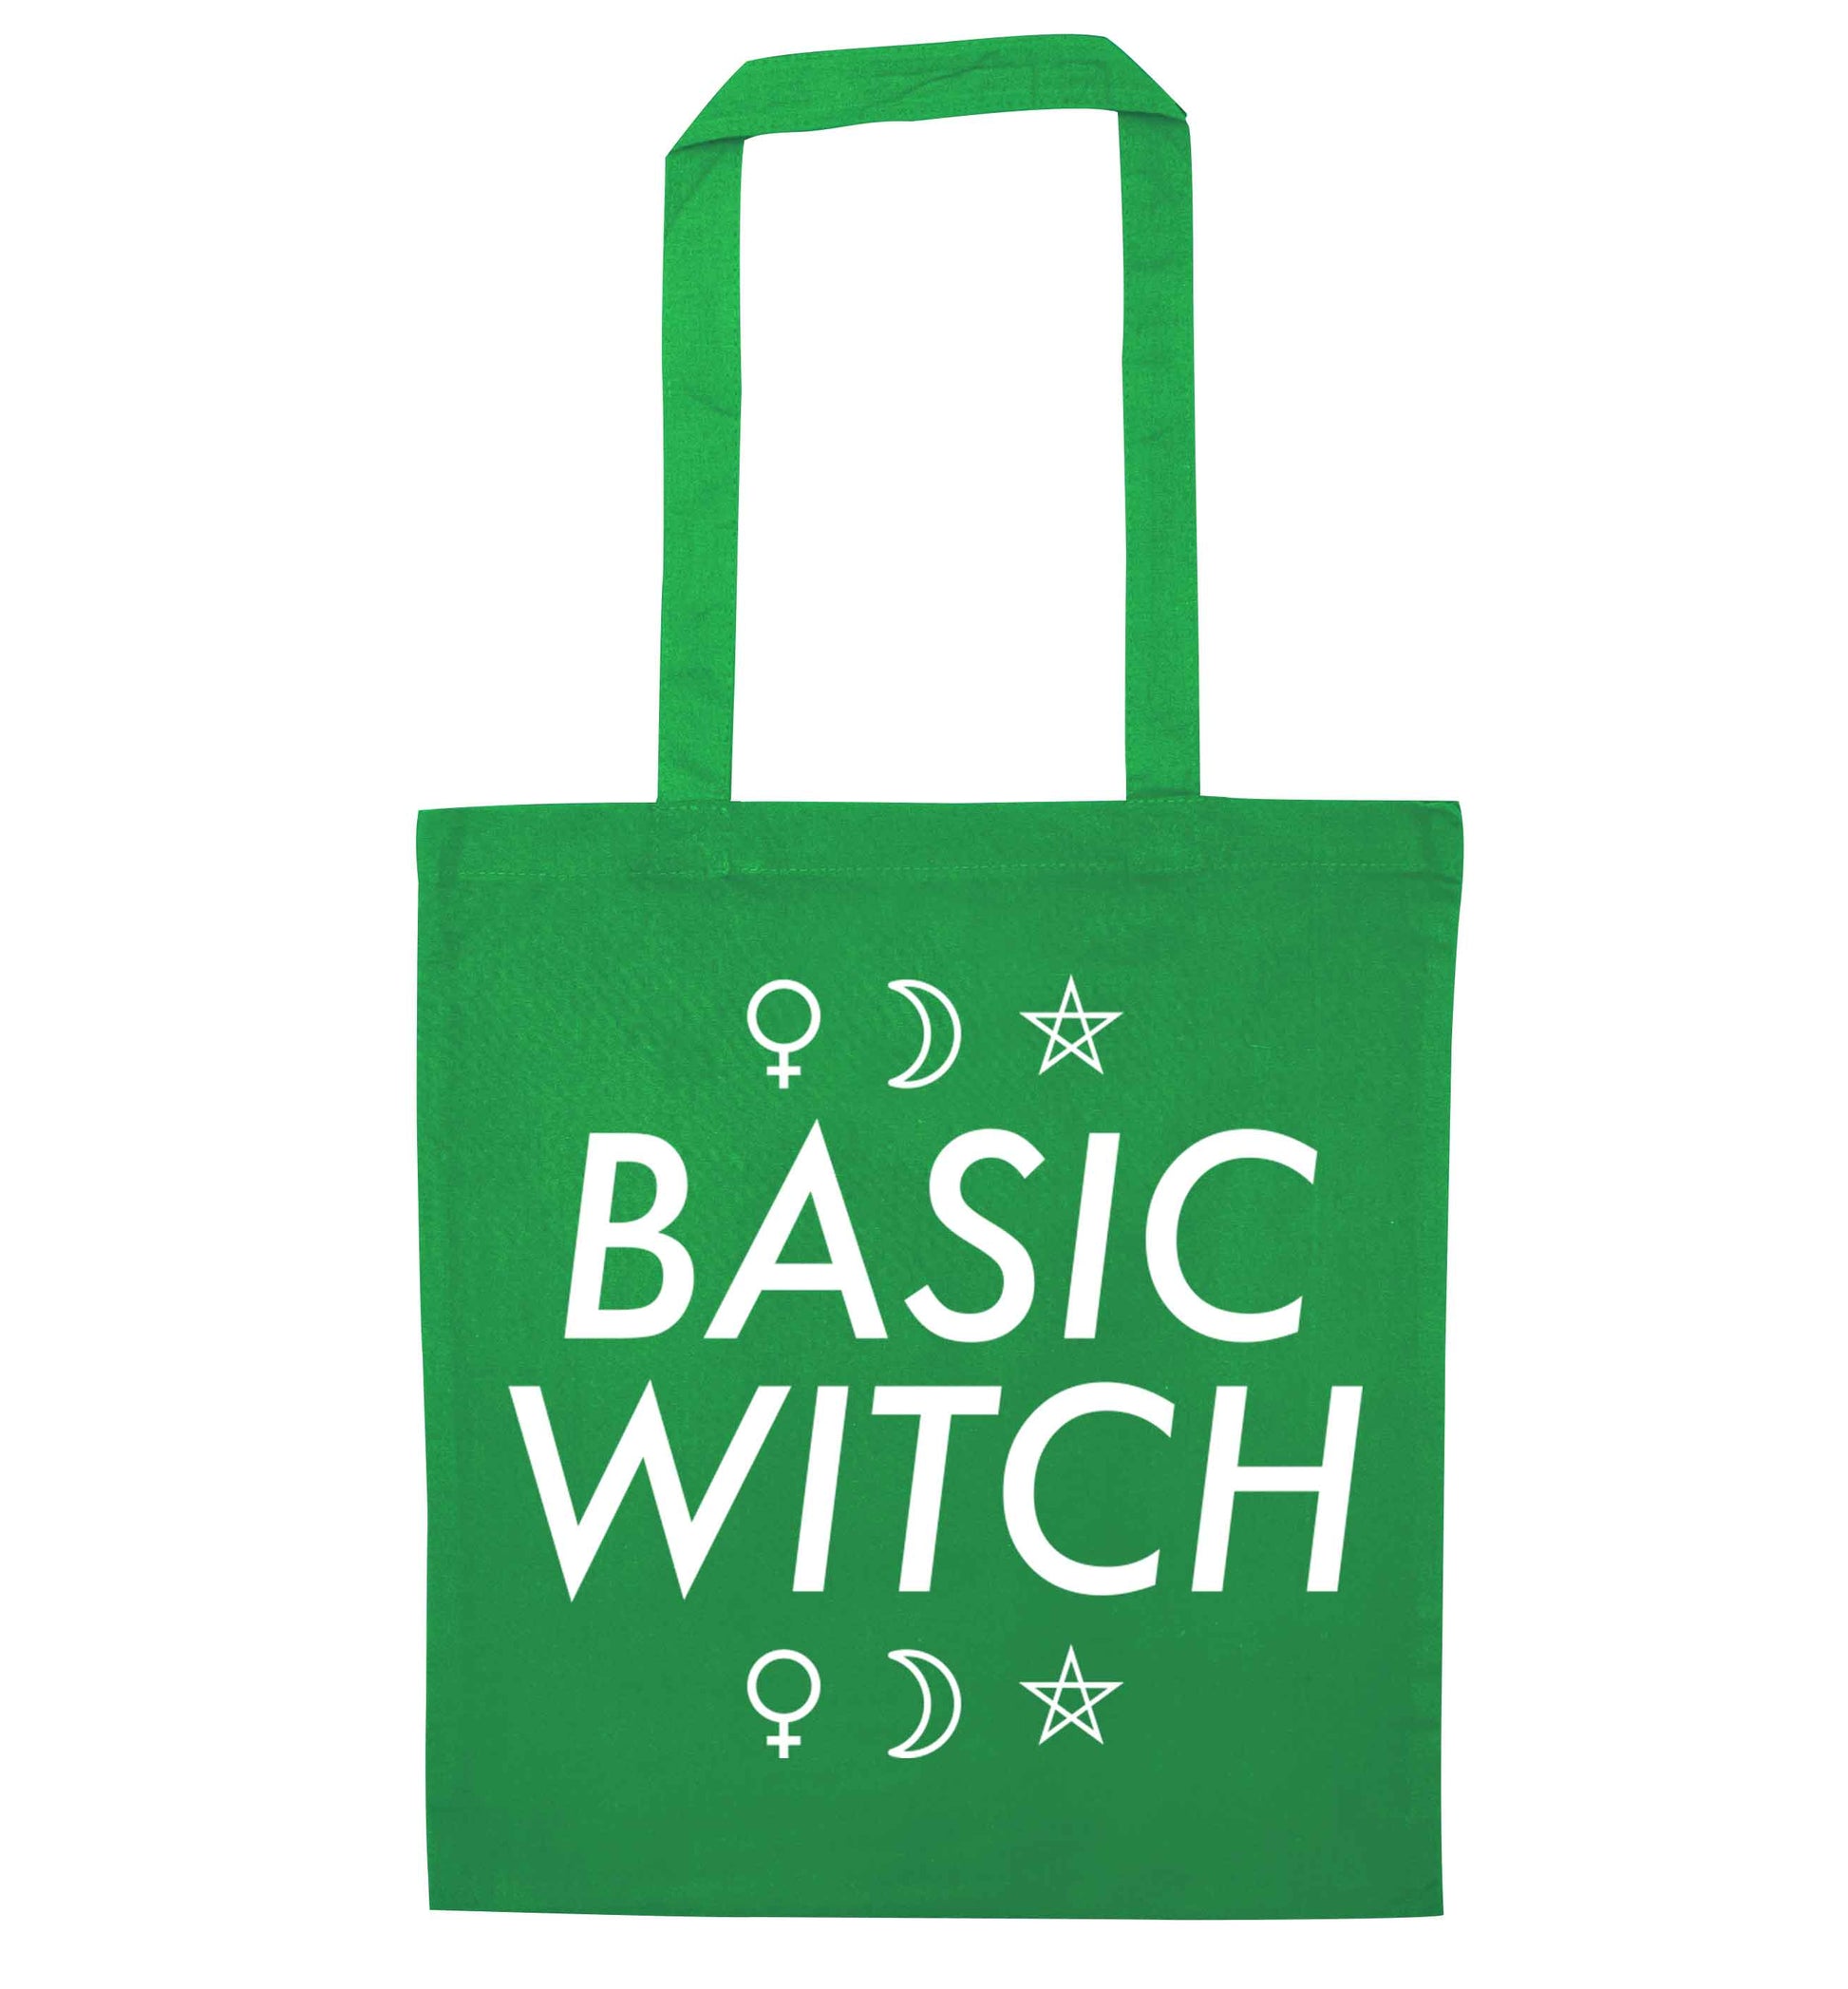 Basic witch 1 green tote bag